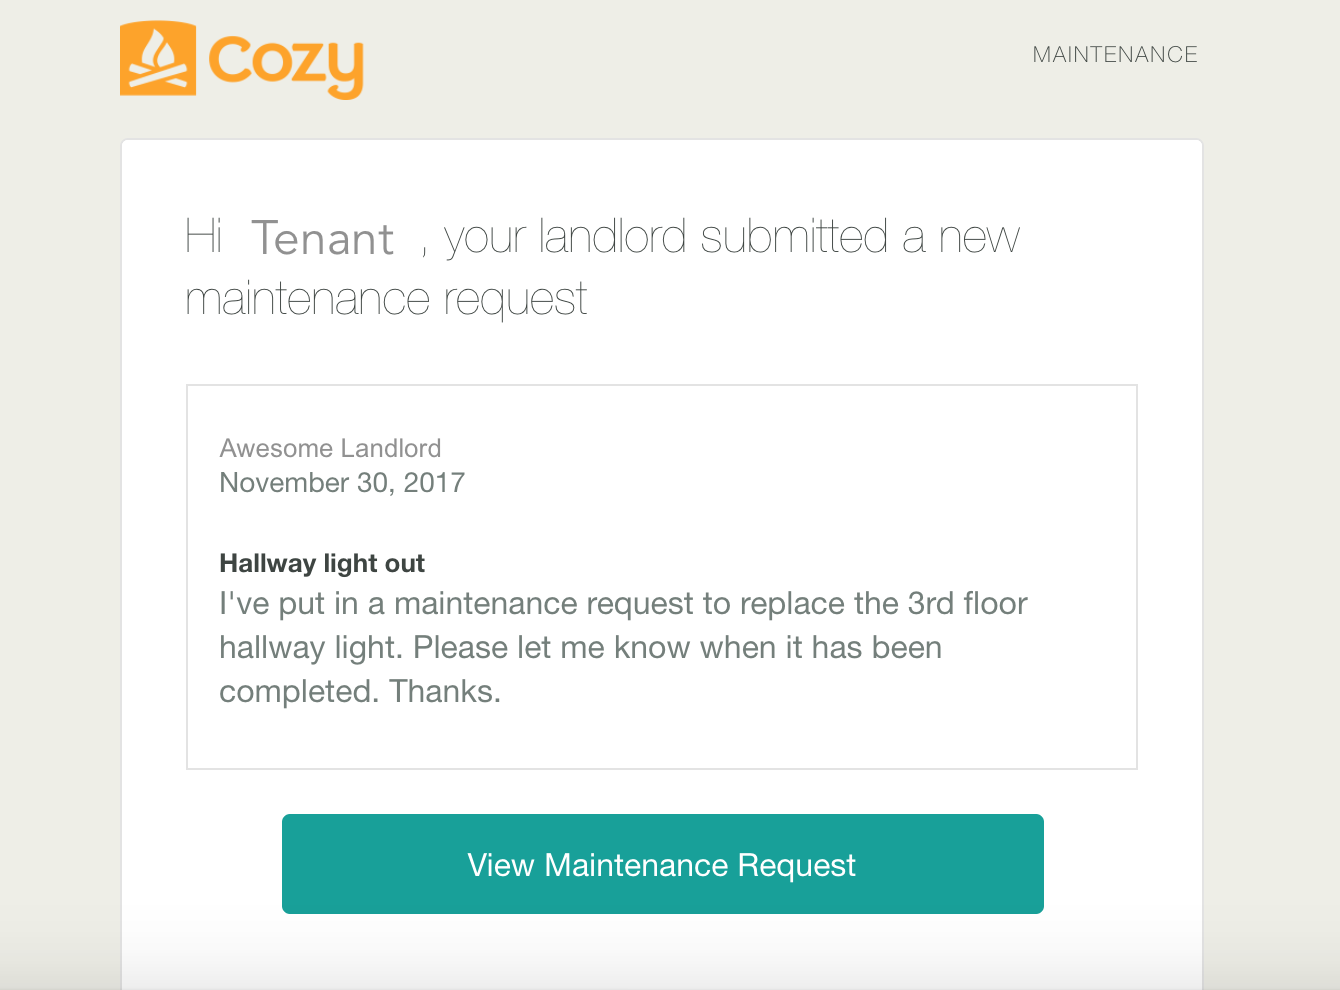 Cozy Maintenance Requests Email to Tenant